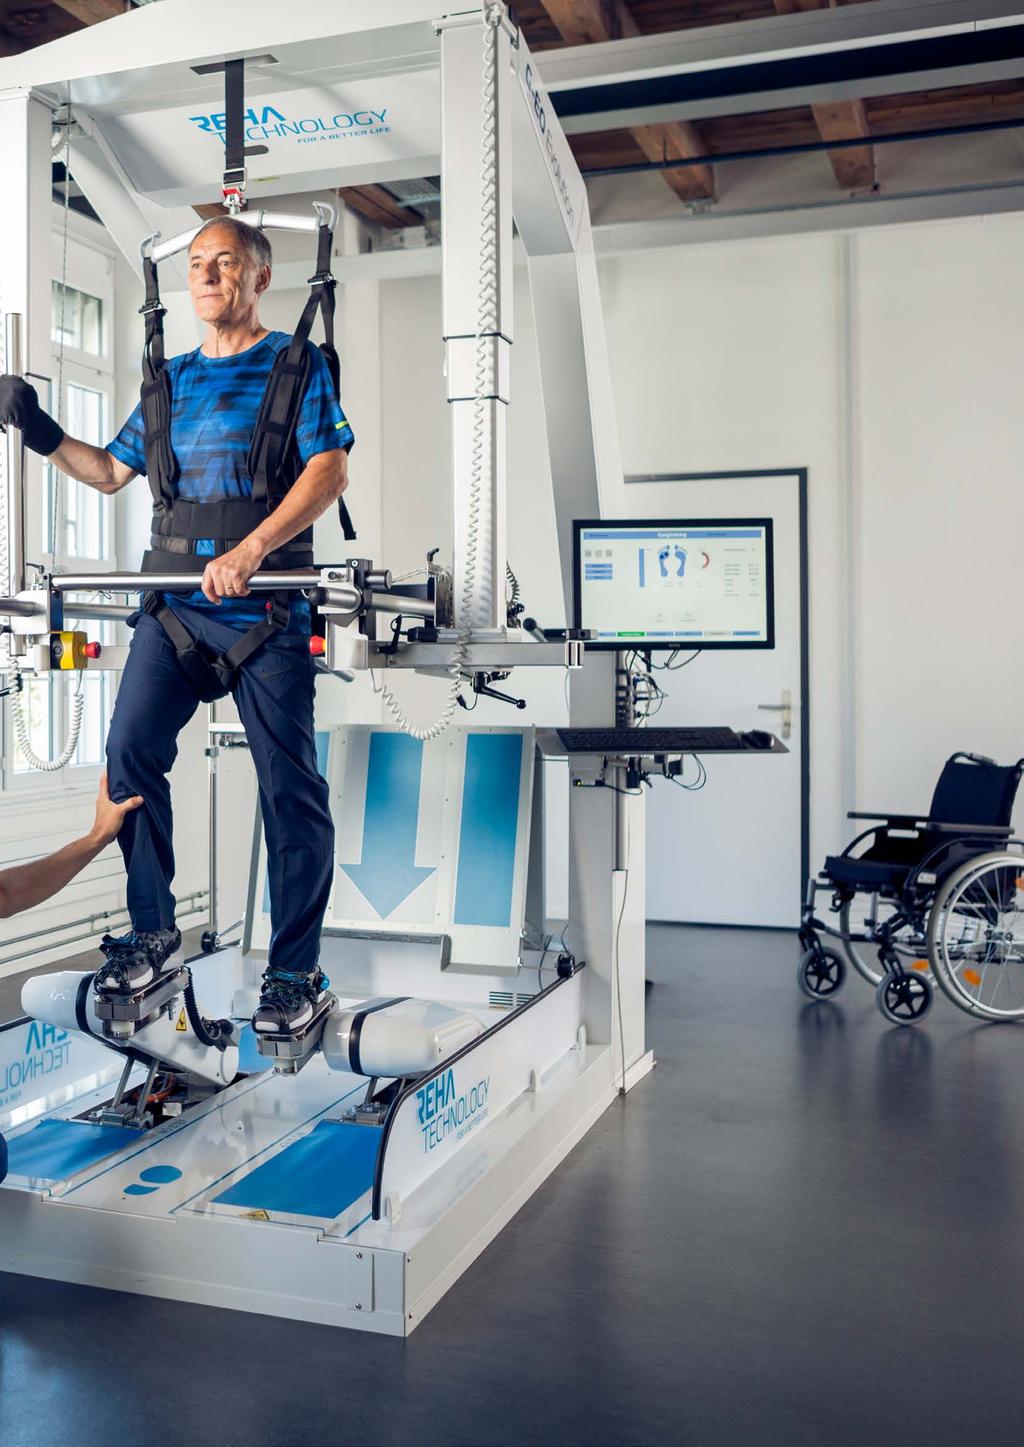 Functions Patient reporting One harness size Floor walking (passive) Partial movement Standard protocols Built-in foot sensors Adjustable settings Step length Cadence Step width Ankle angle Max.